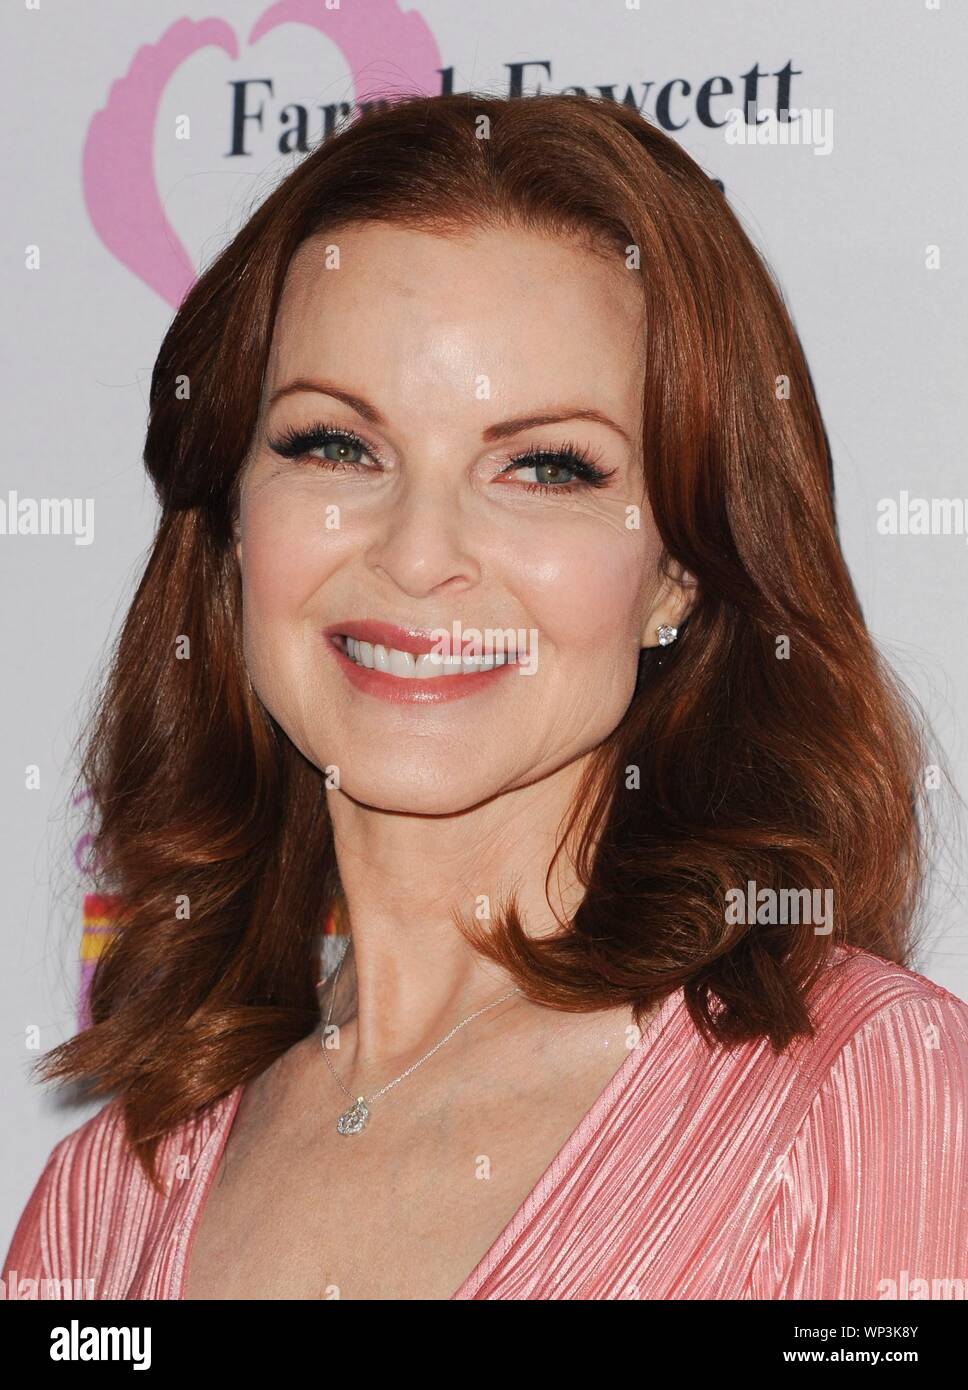 Los Angeles, CA. 6th Sep, 2019. Marcia Cross at arrivals for Farrah Fawcett Foundation's Tex-Mex Fiesta, Wallis Annenberg Center for the Performing Arts, Los Angeles, CA September 6, 2019. Credit: Elizabeth Goodenough/Everett Collection/Alamy Live News Stock Photo